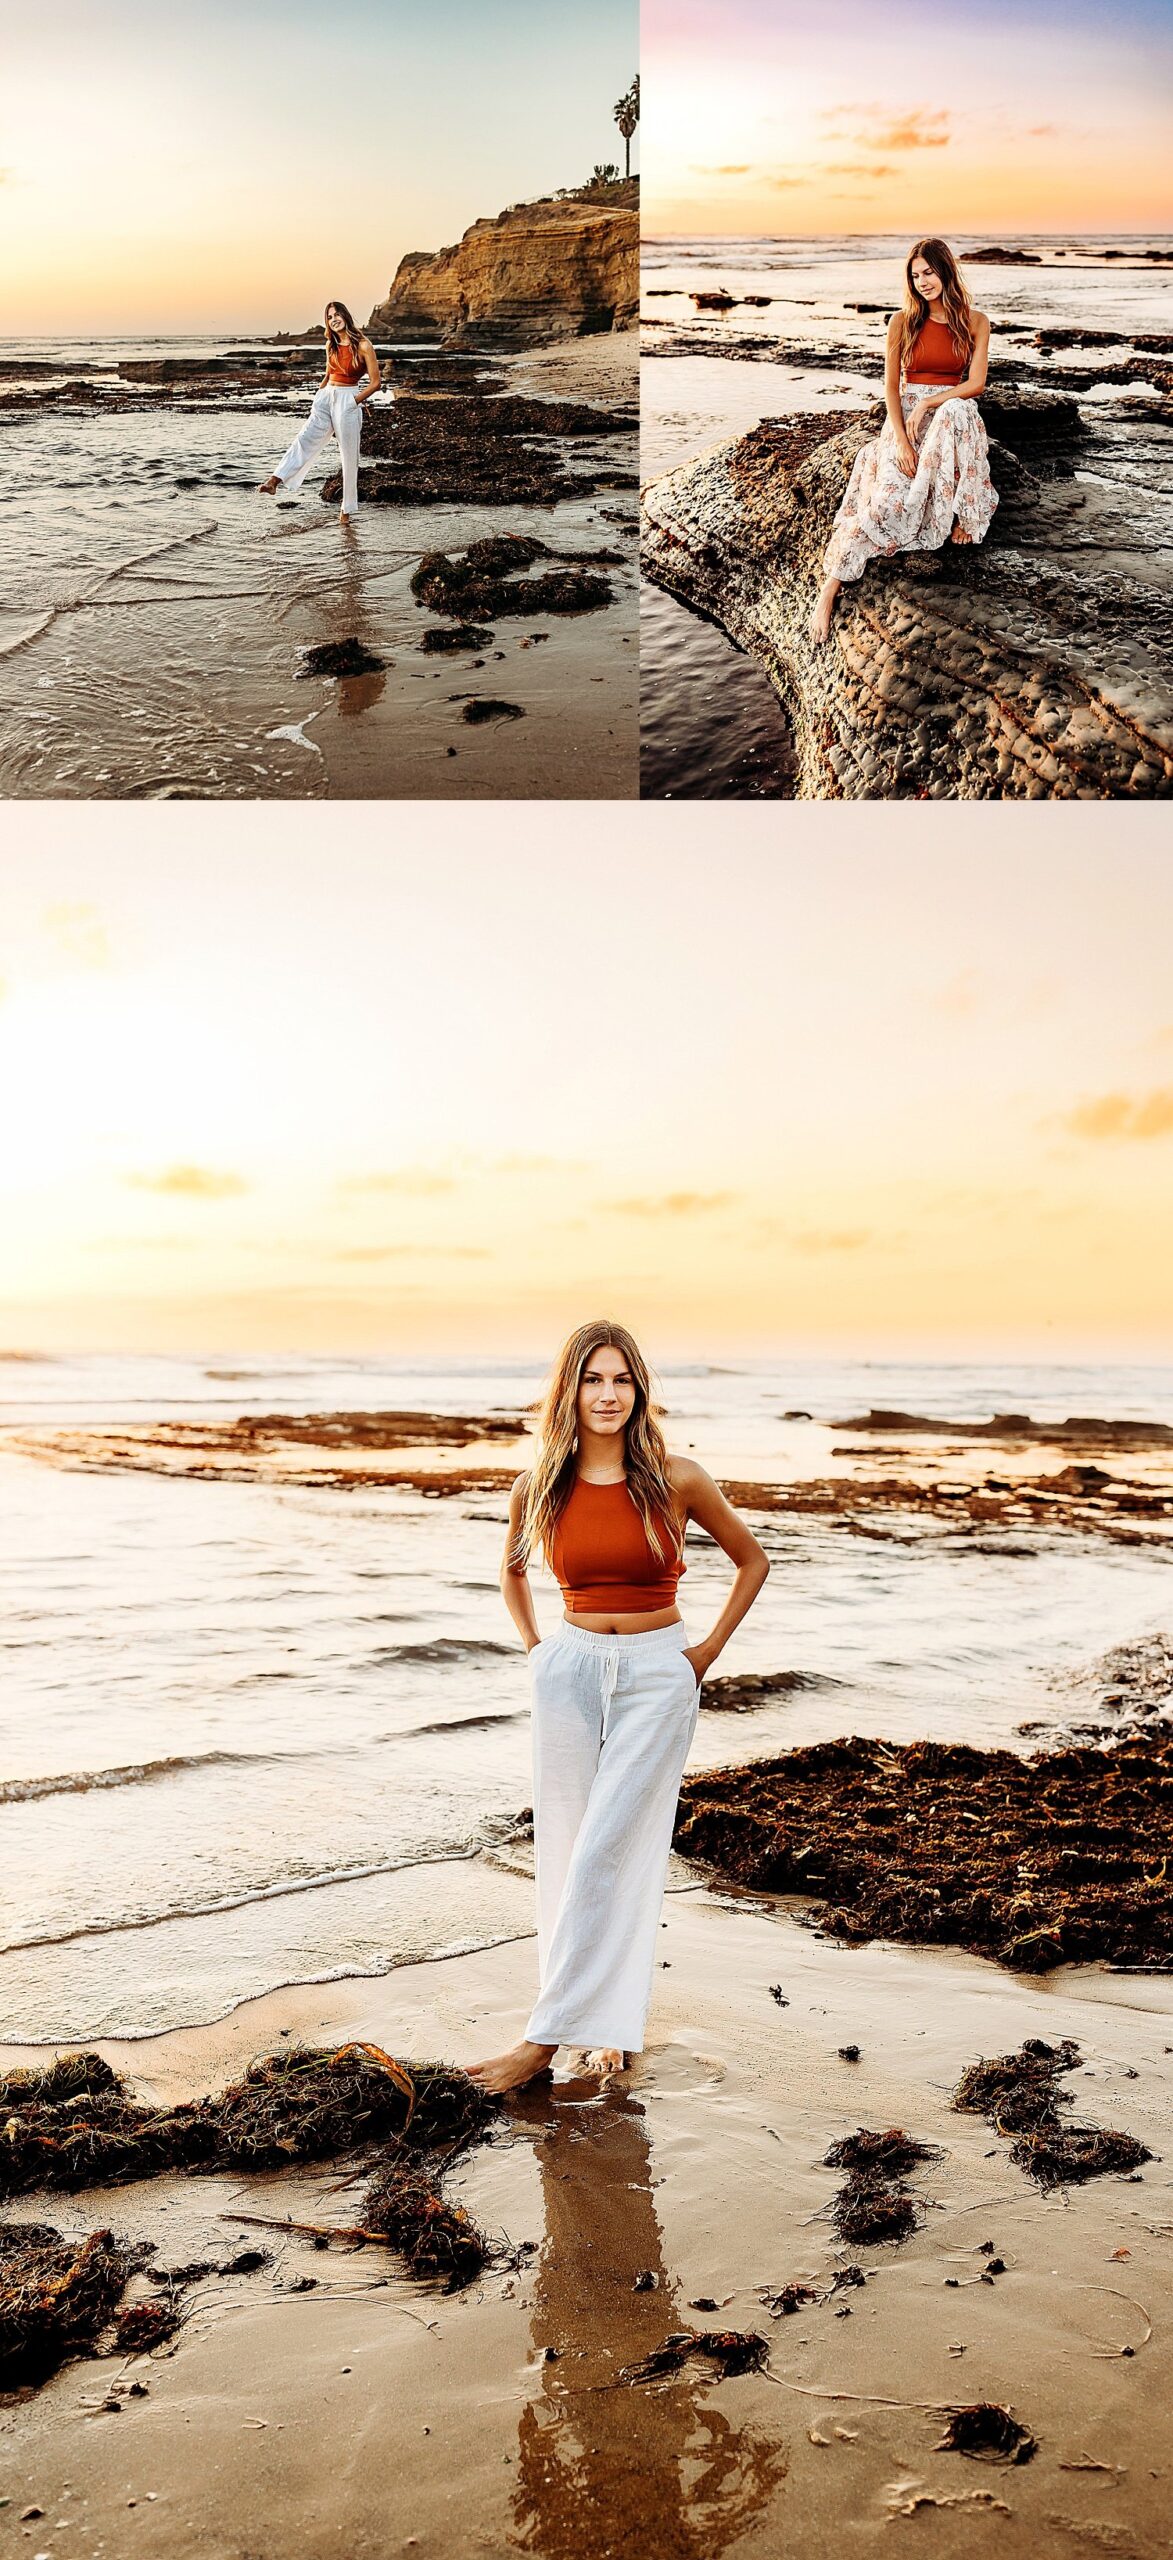  high school senior wearing white flare pants and red top standing on sandy beach at sunset cliffs 